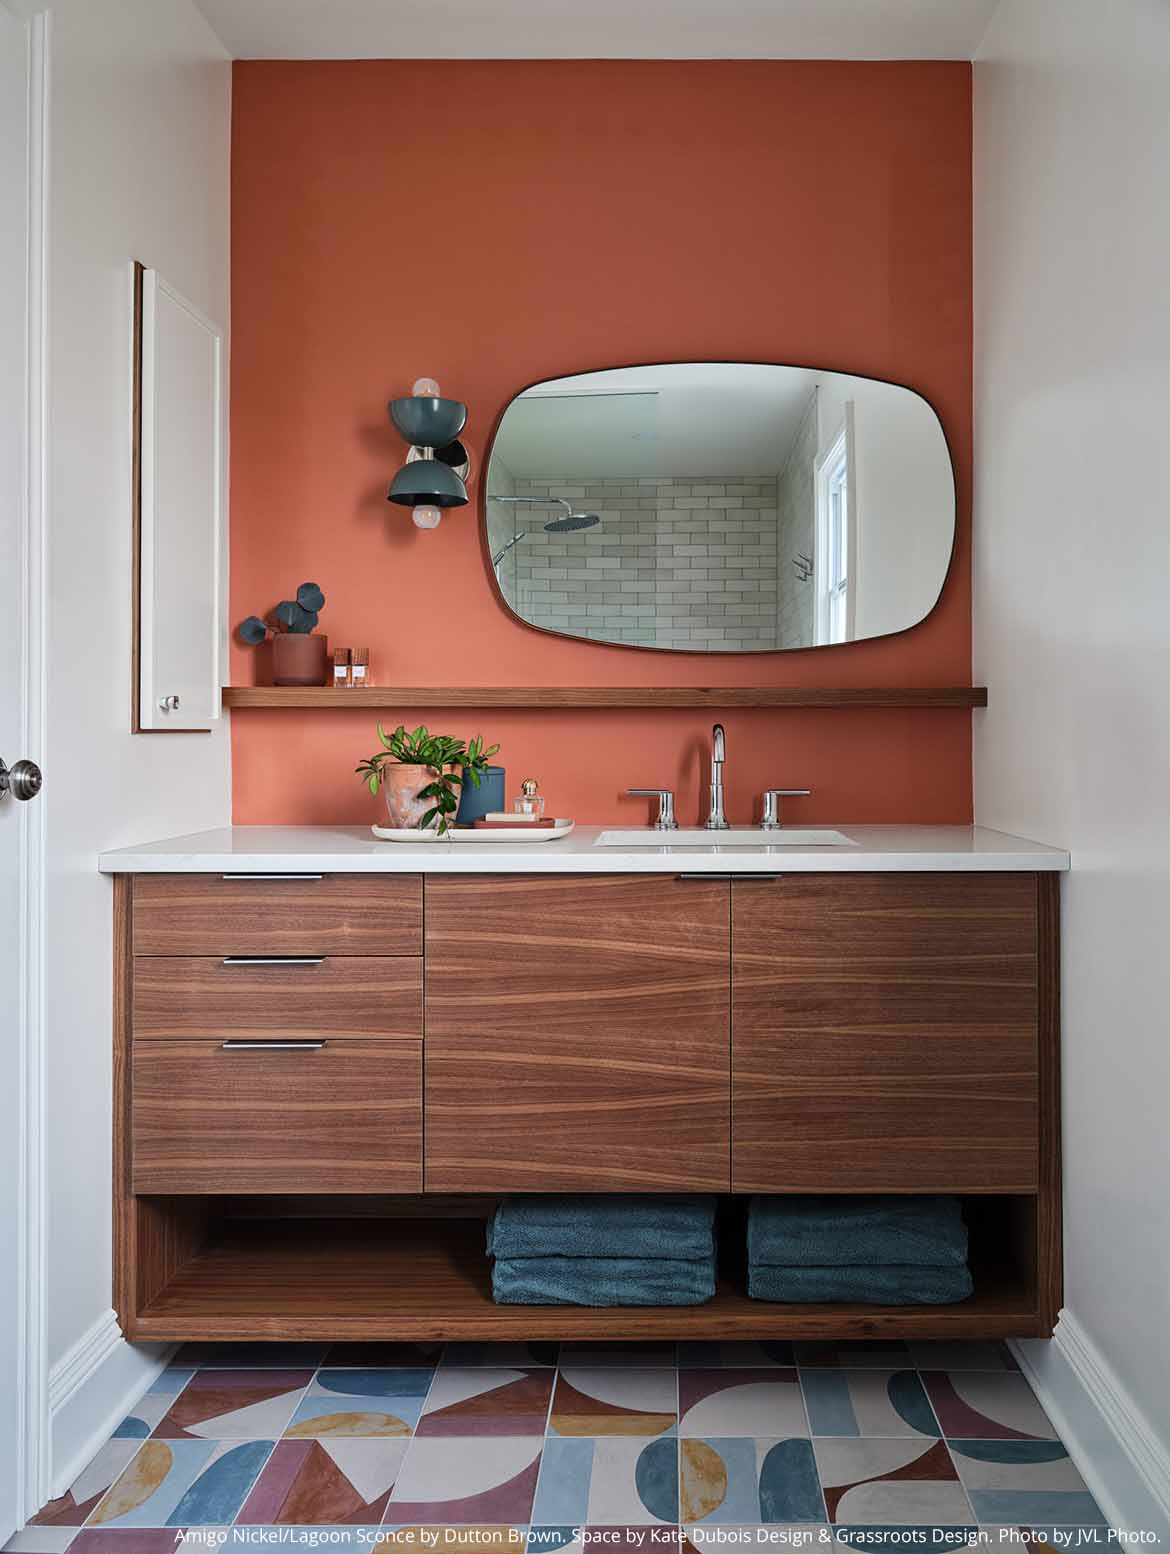 Nickel and lagoon color Amigo sconce by Dutton Brown. Space by Kate Dubois Design. Photo by JVL Photo.